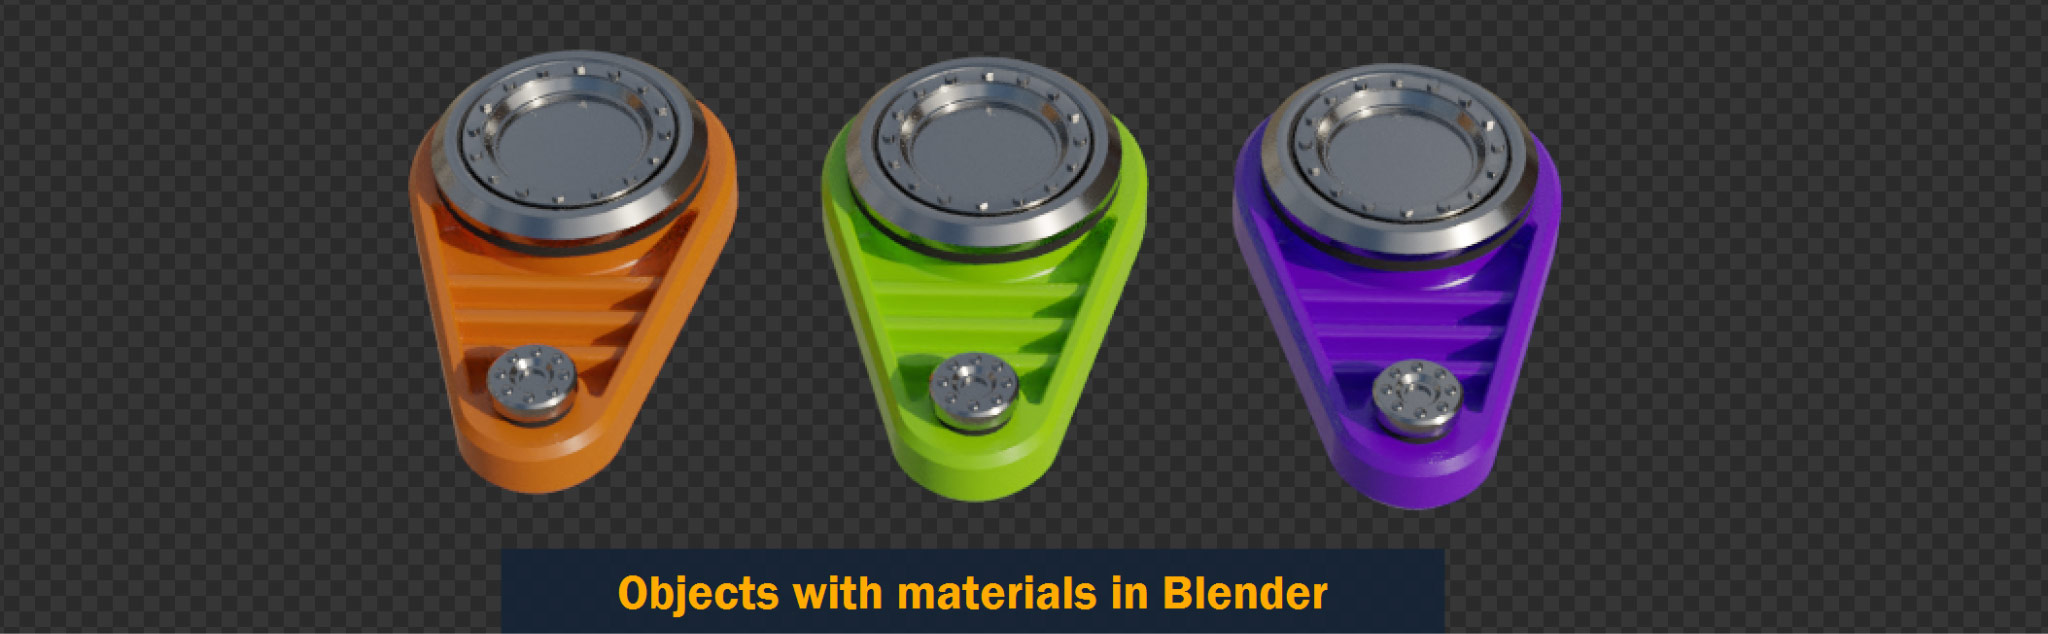 objects with materials in blender